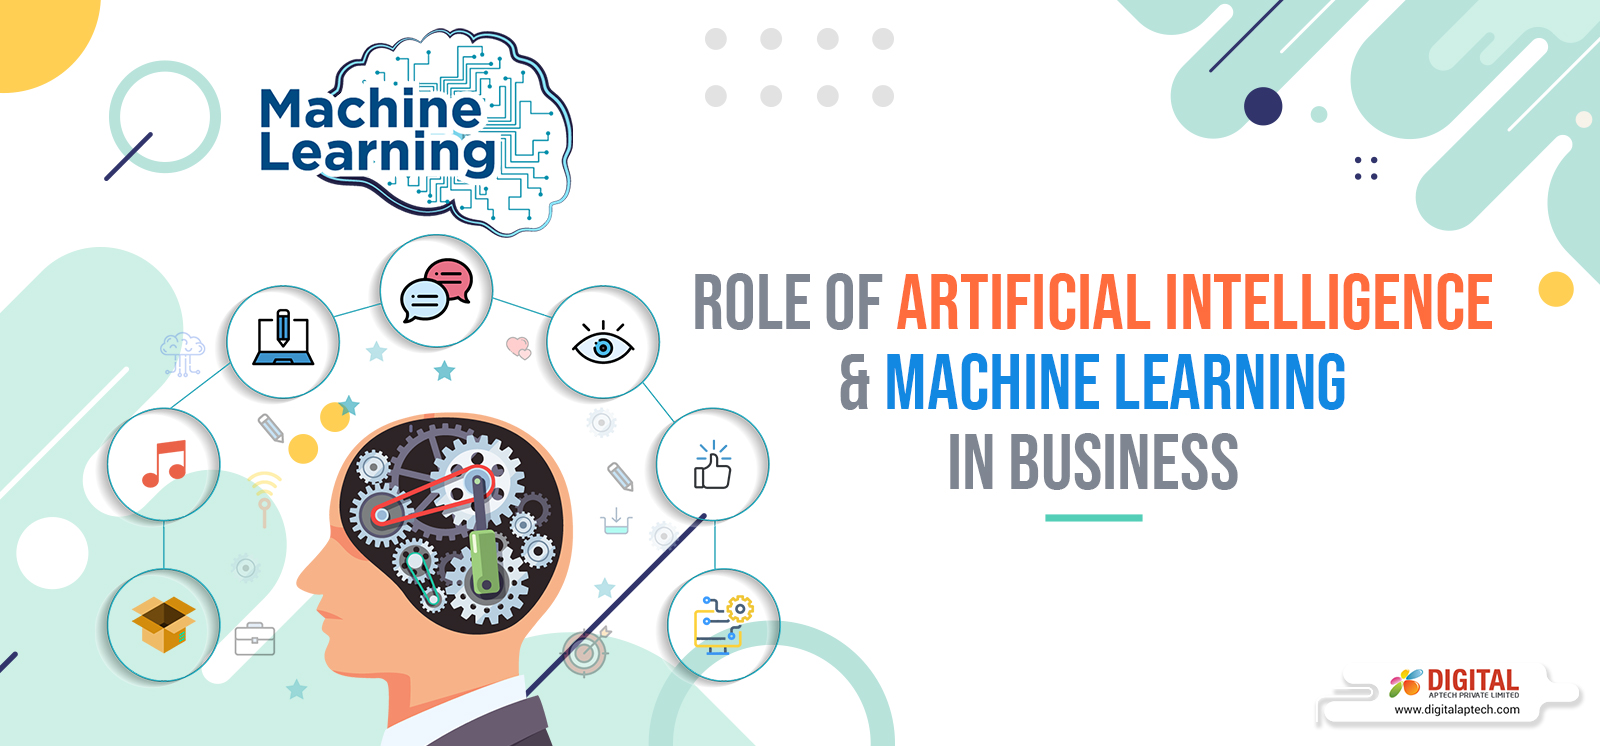 Role of Artificial Intelligence & Machine Learning in Business